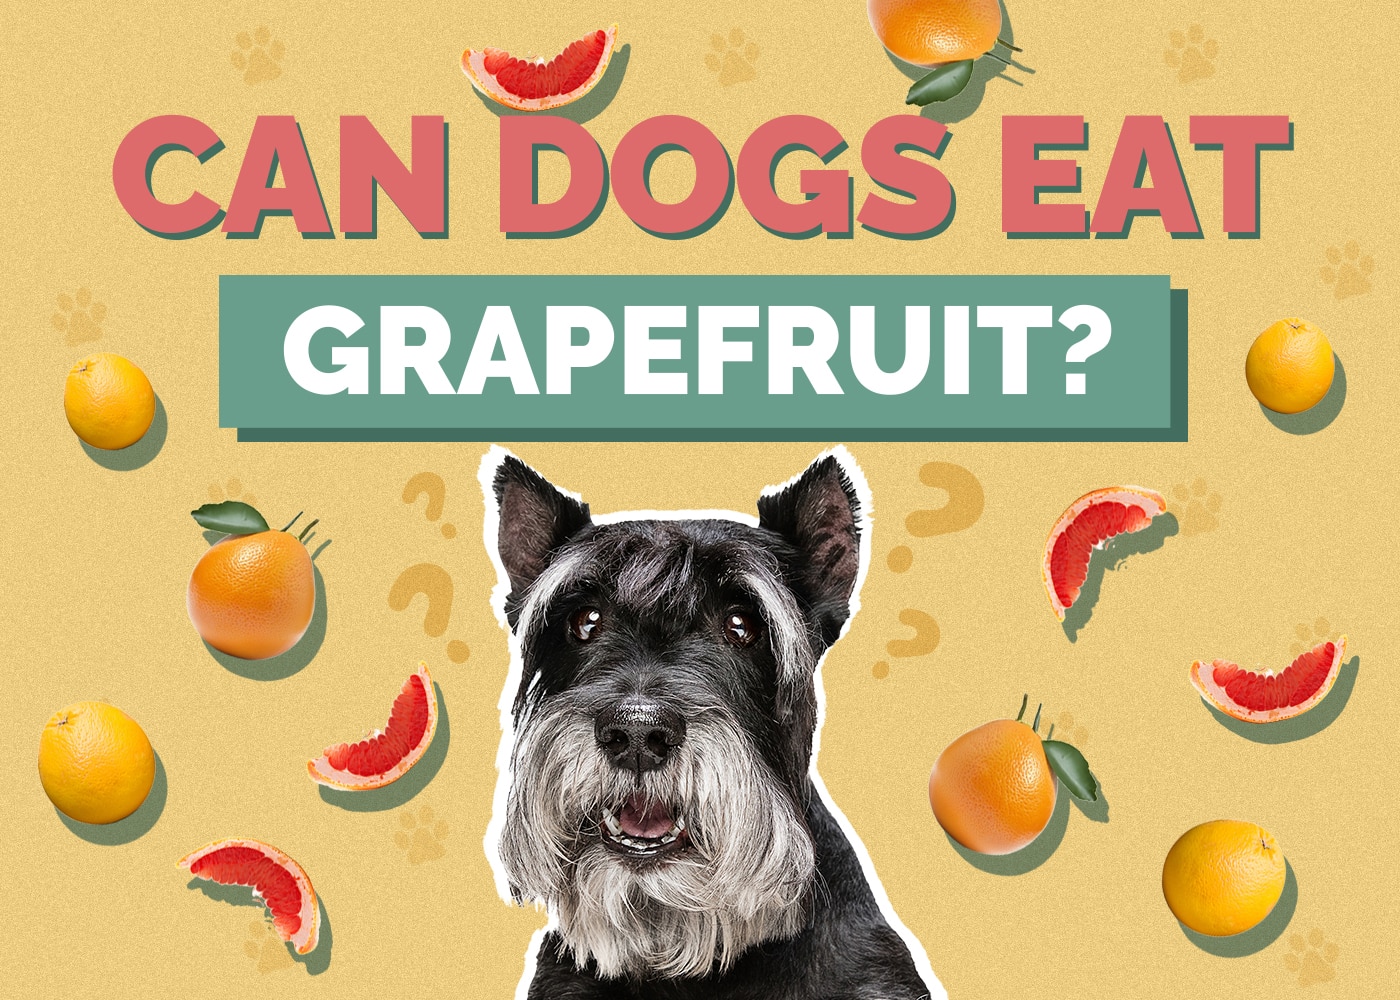 Can Dogs Eat grapefruit